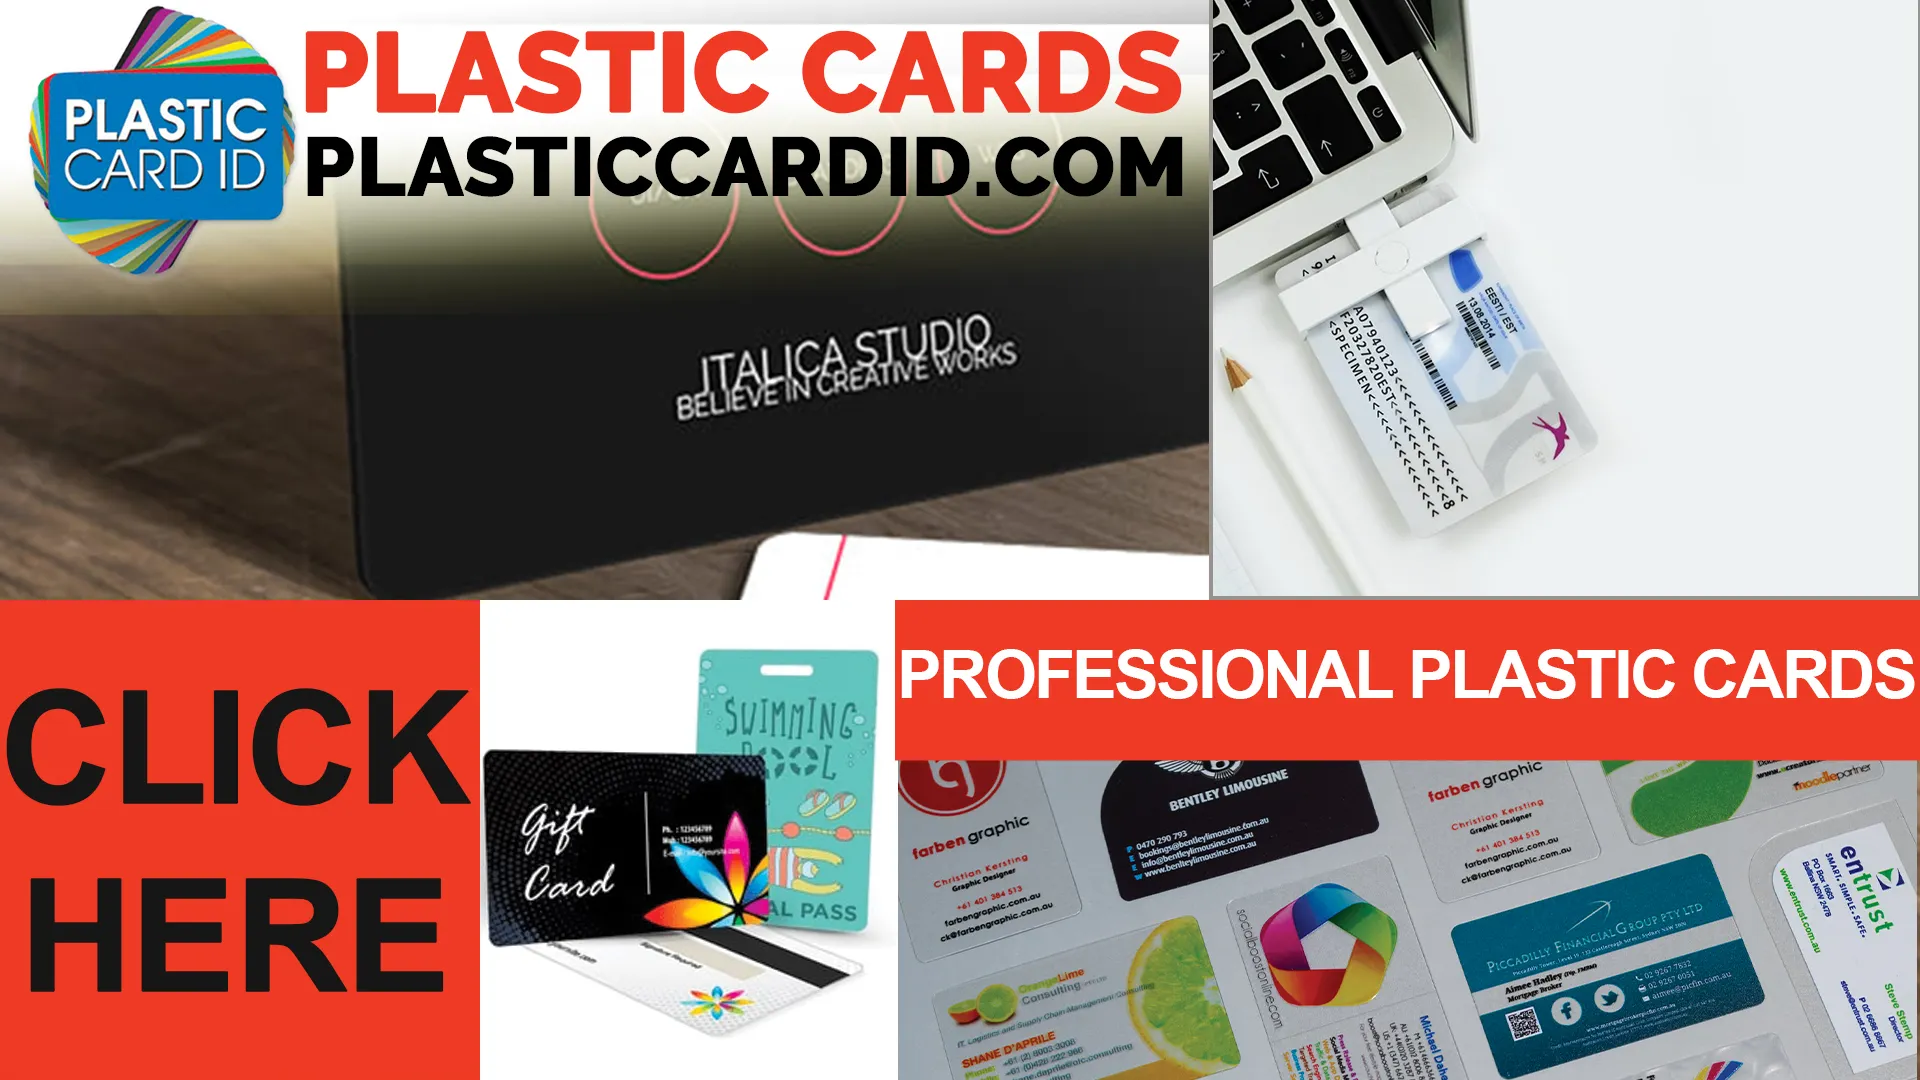 PCID



: Your Partner in Professional Plastic Card Solutions